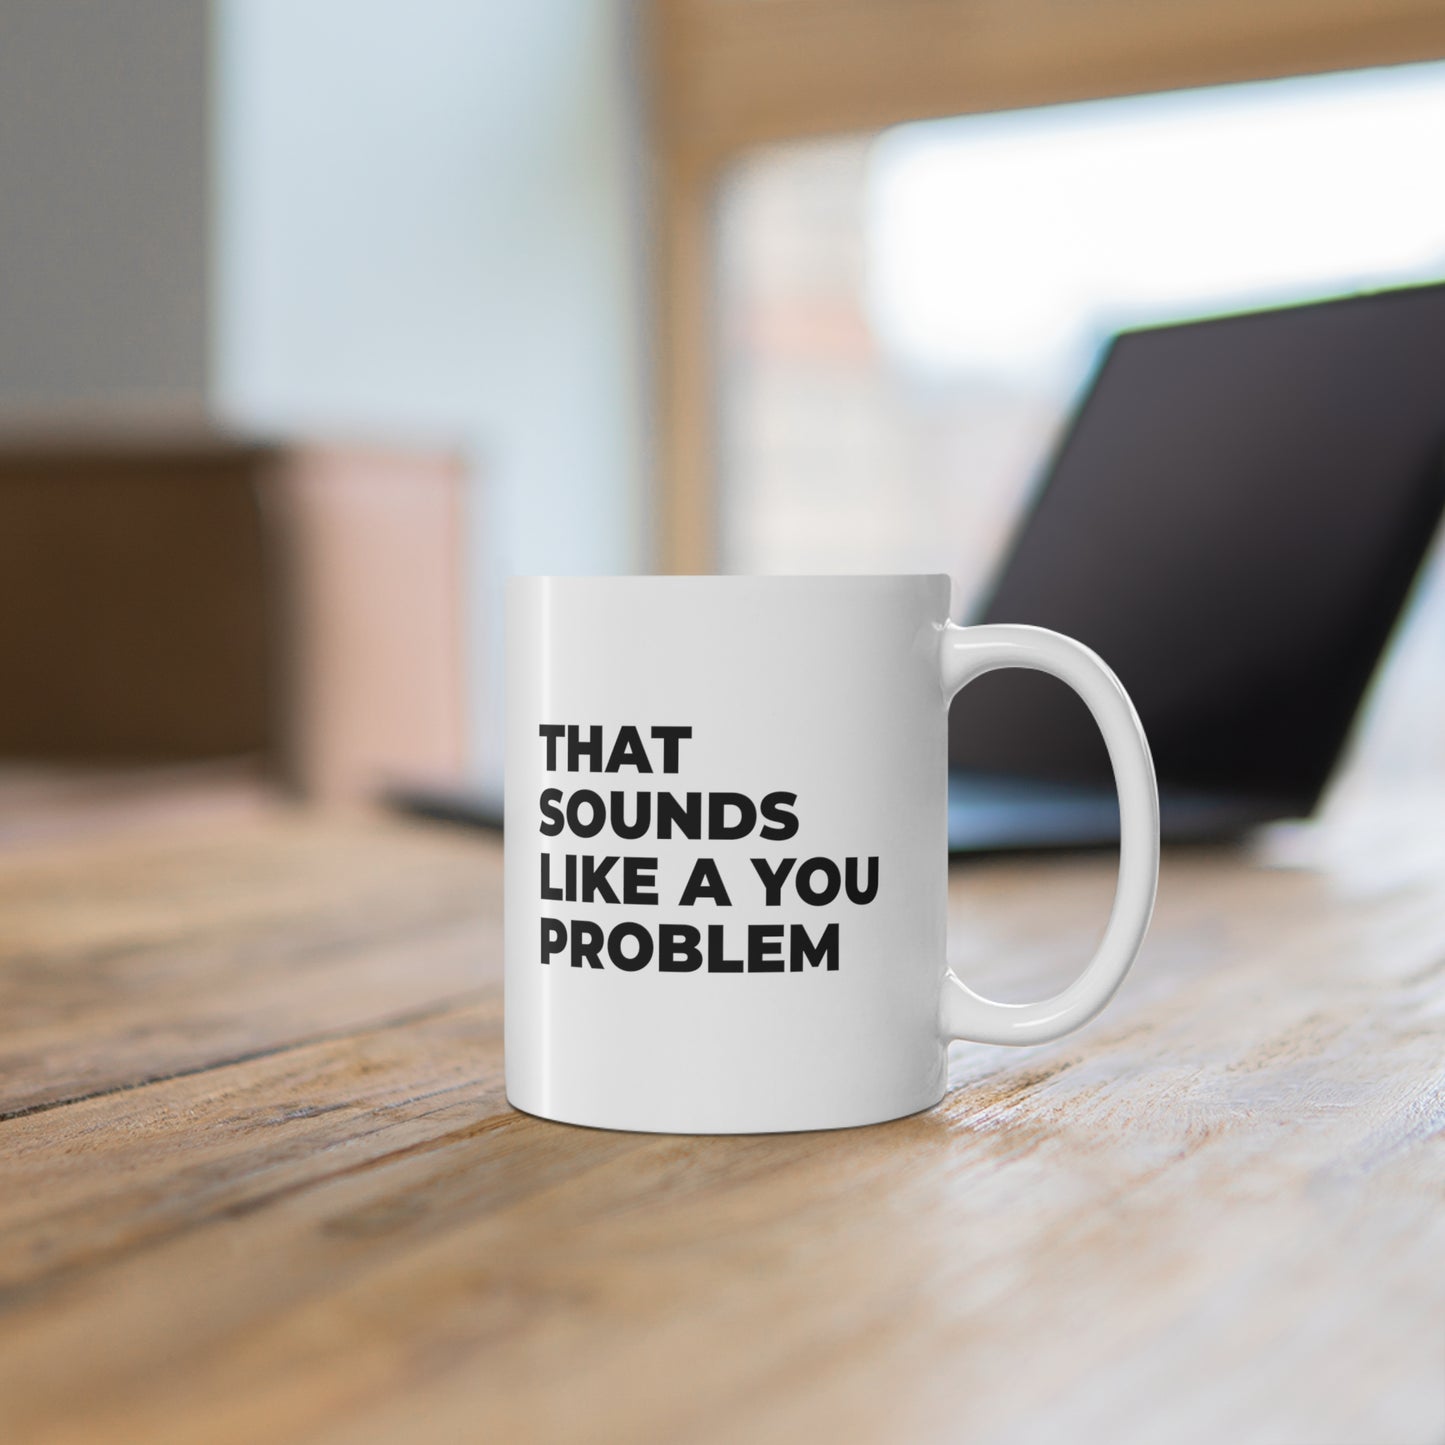 mug with quote: That Sounds Like a You Problem